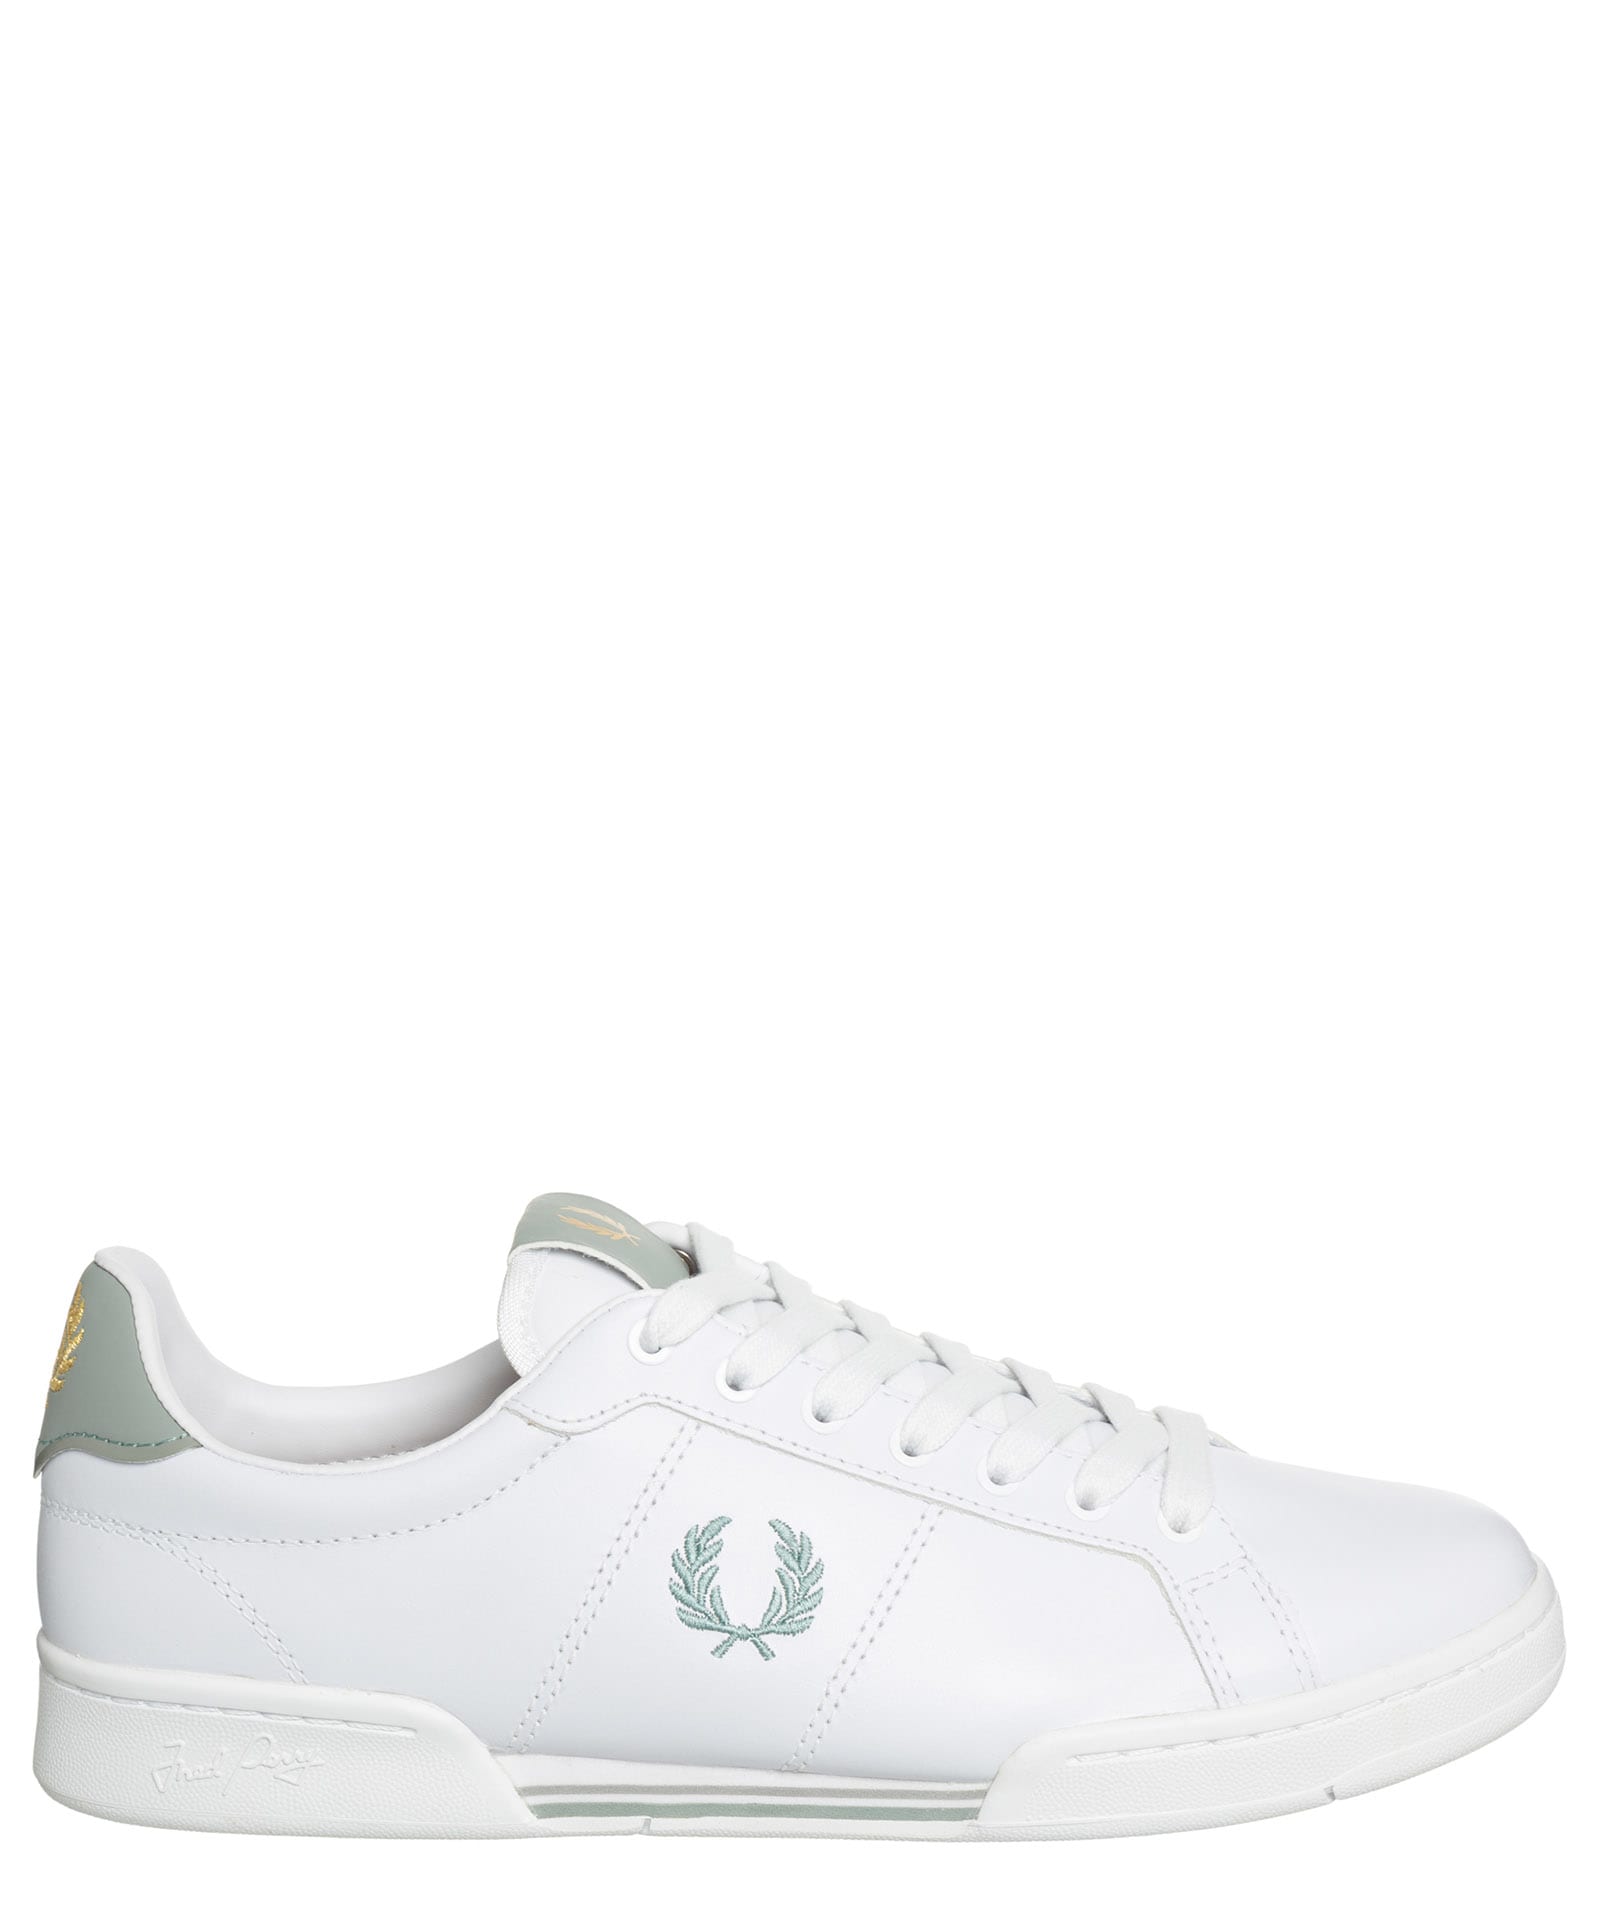 FRED PERRY B722 LEATHER SNEAKERS